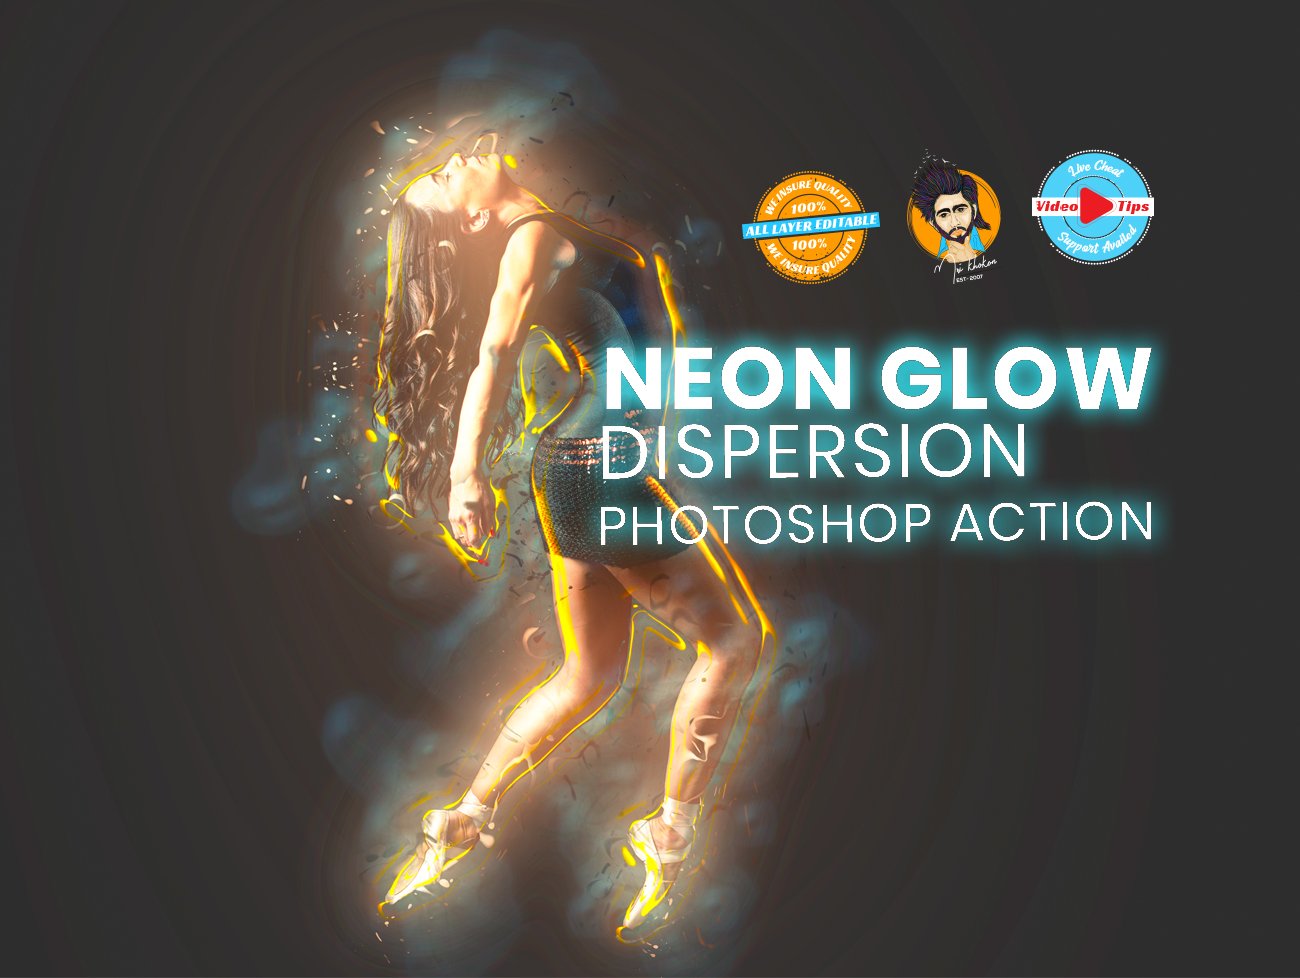 Neon Glow Dispersioncover image.